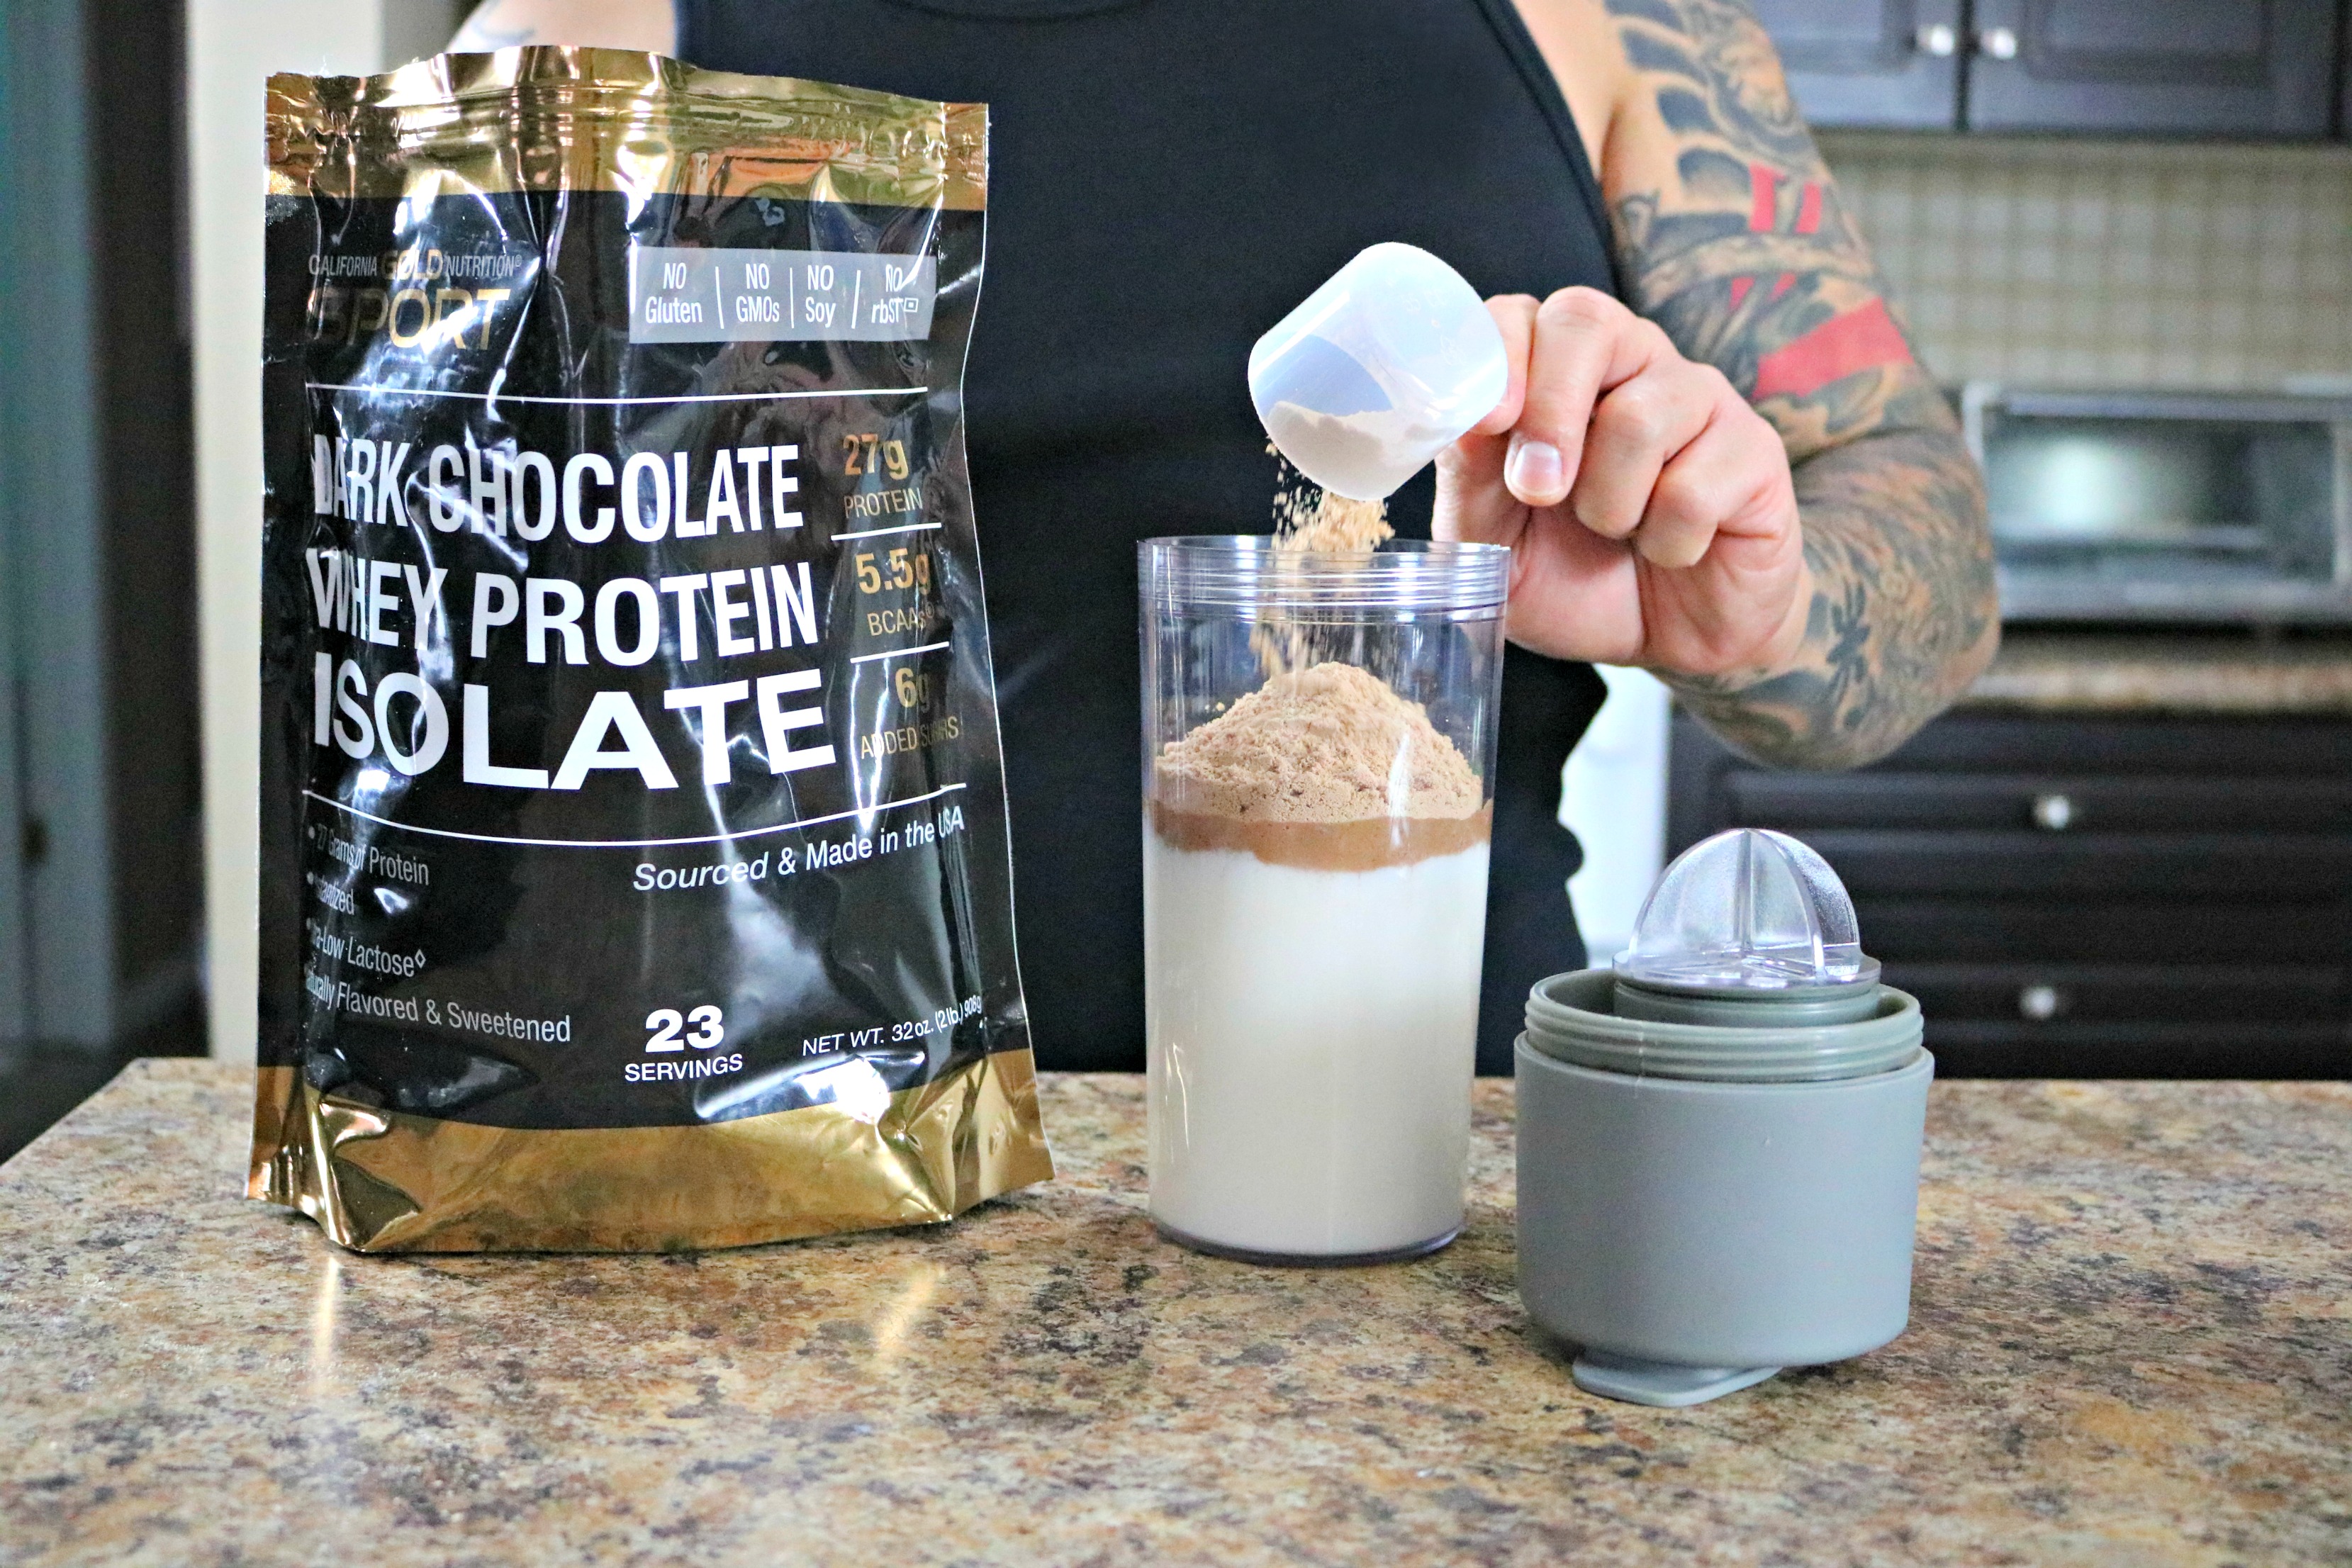 Dark Chocolate Whey Protein Isolate being poured into shaker bottle.